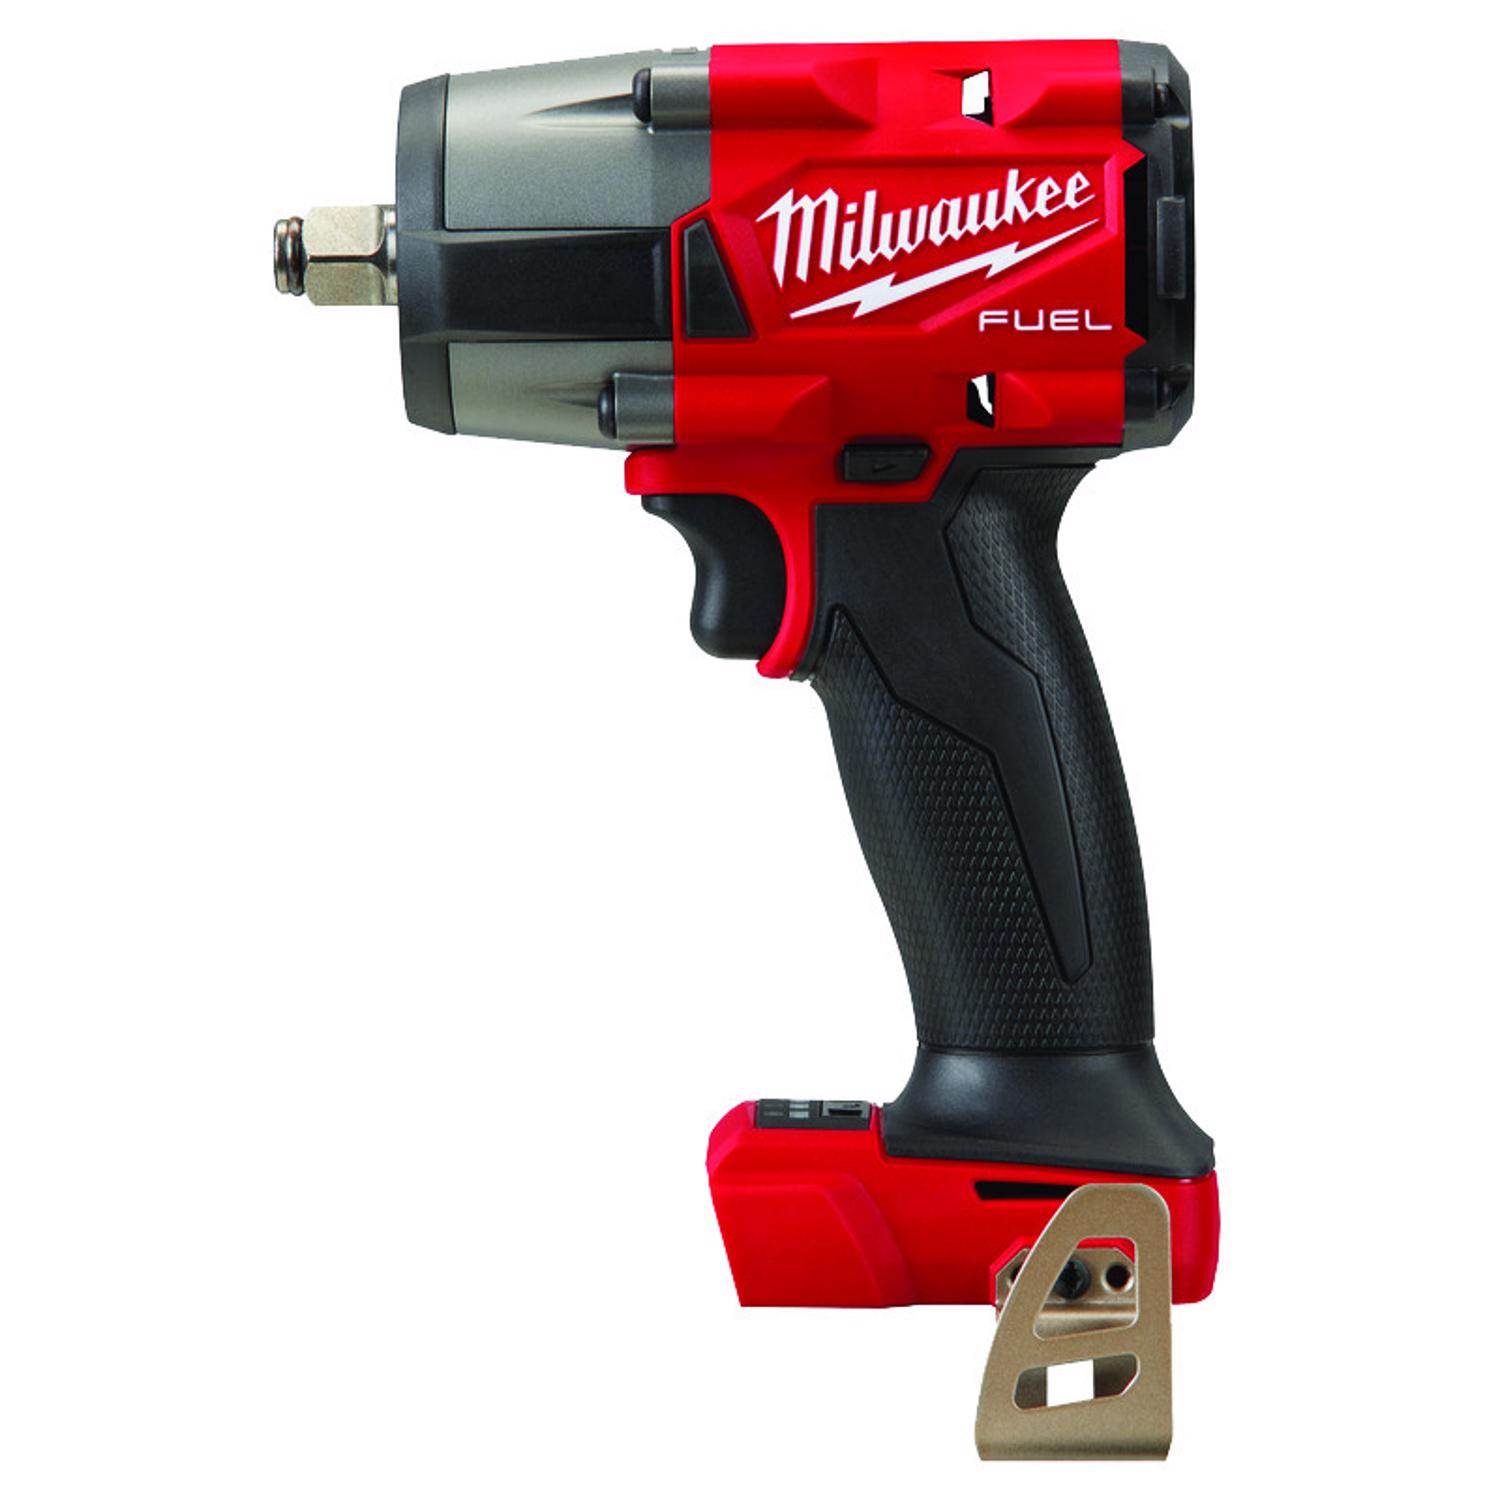 Photos - Drill / Screwdriver Milwaukee M18 FUEL 1/2 in. Cordless Brushless Impact Wrench Tool Only 2962 